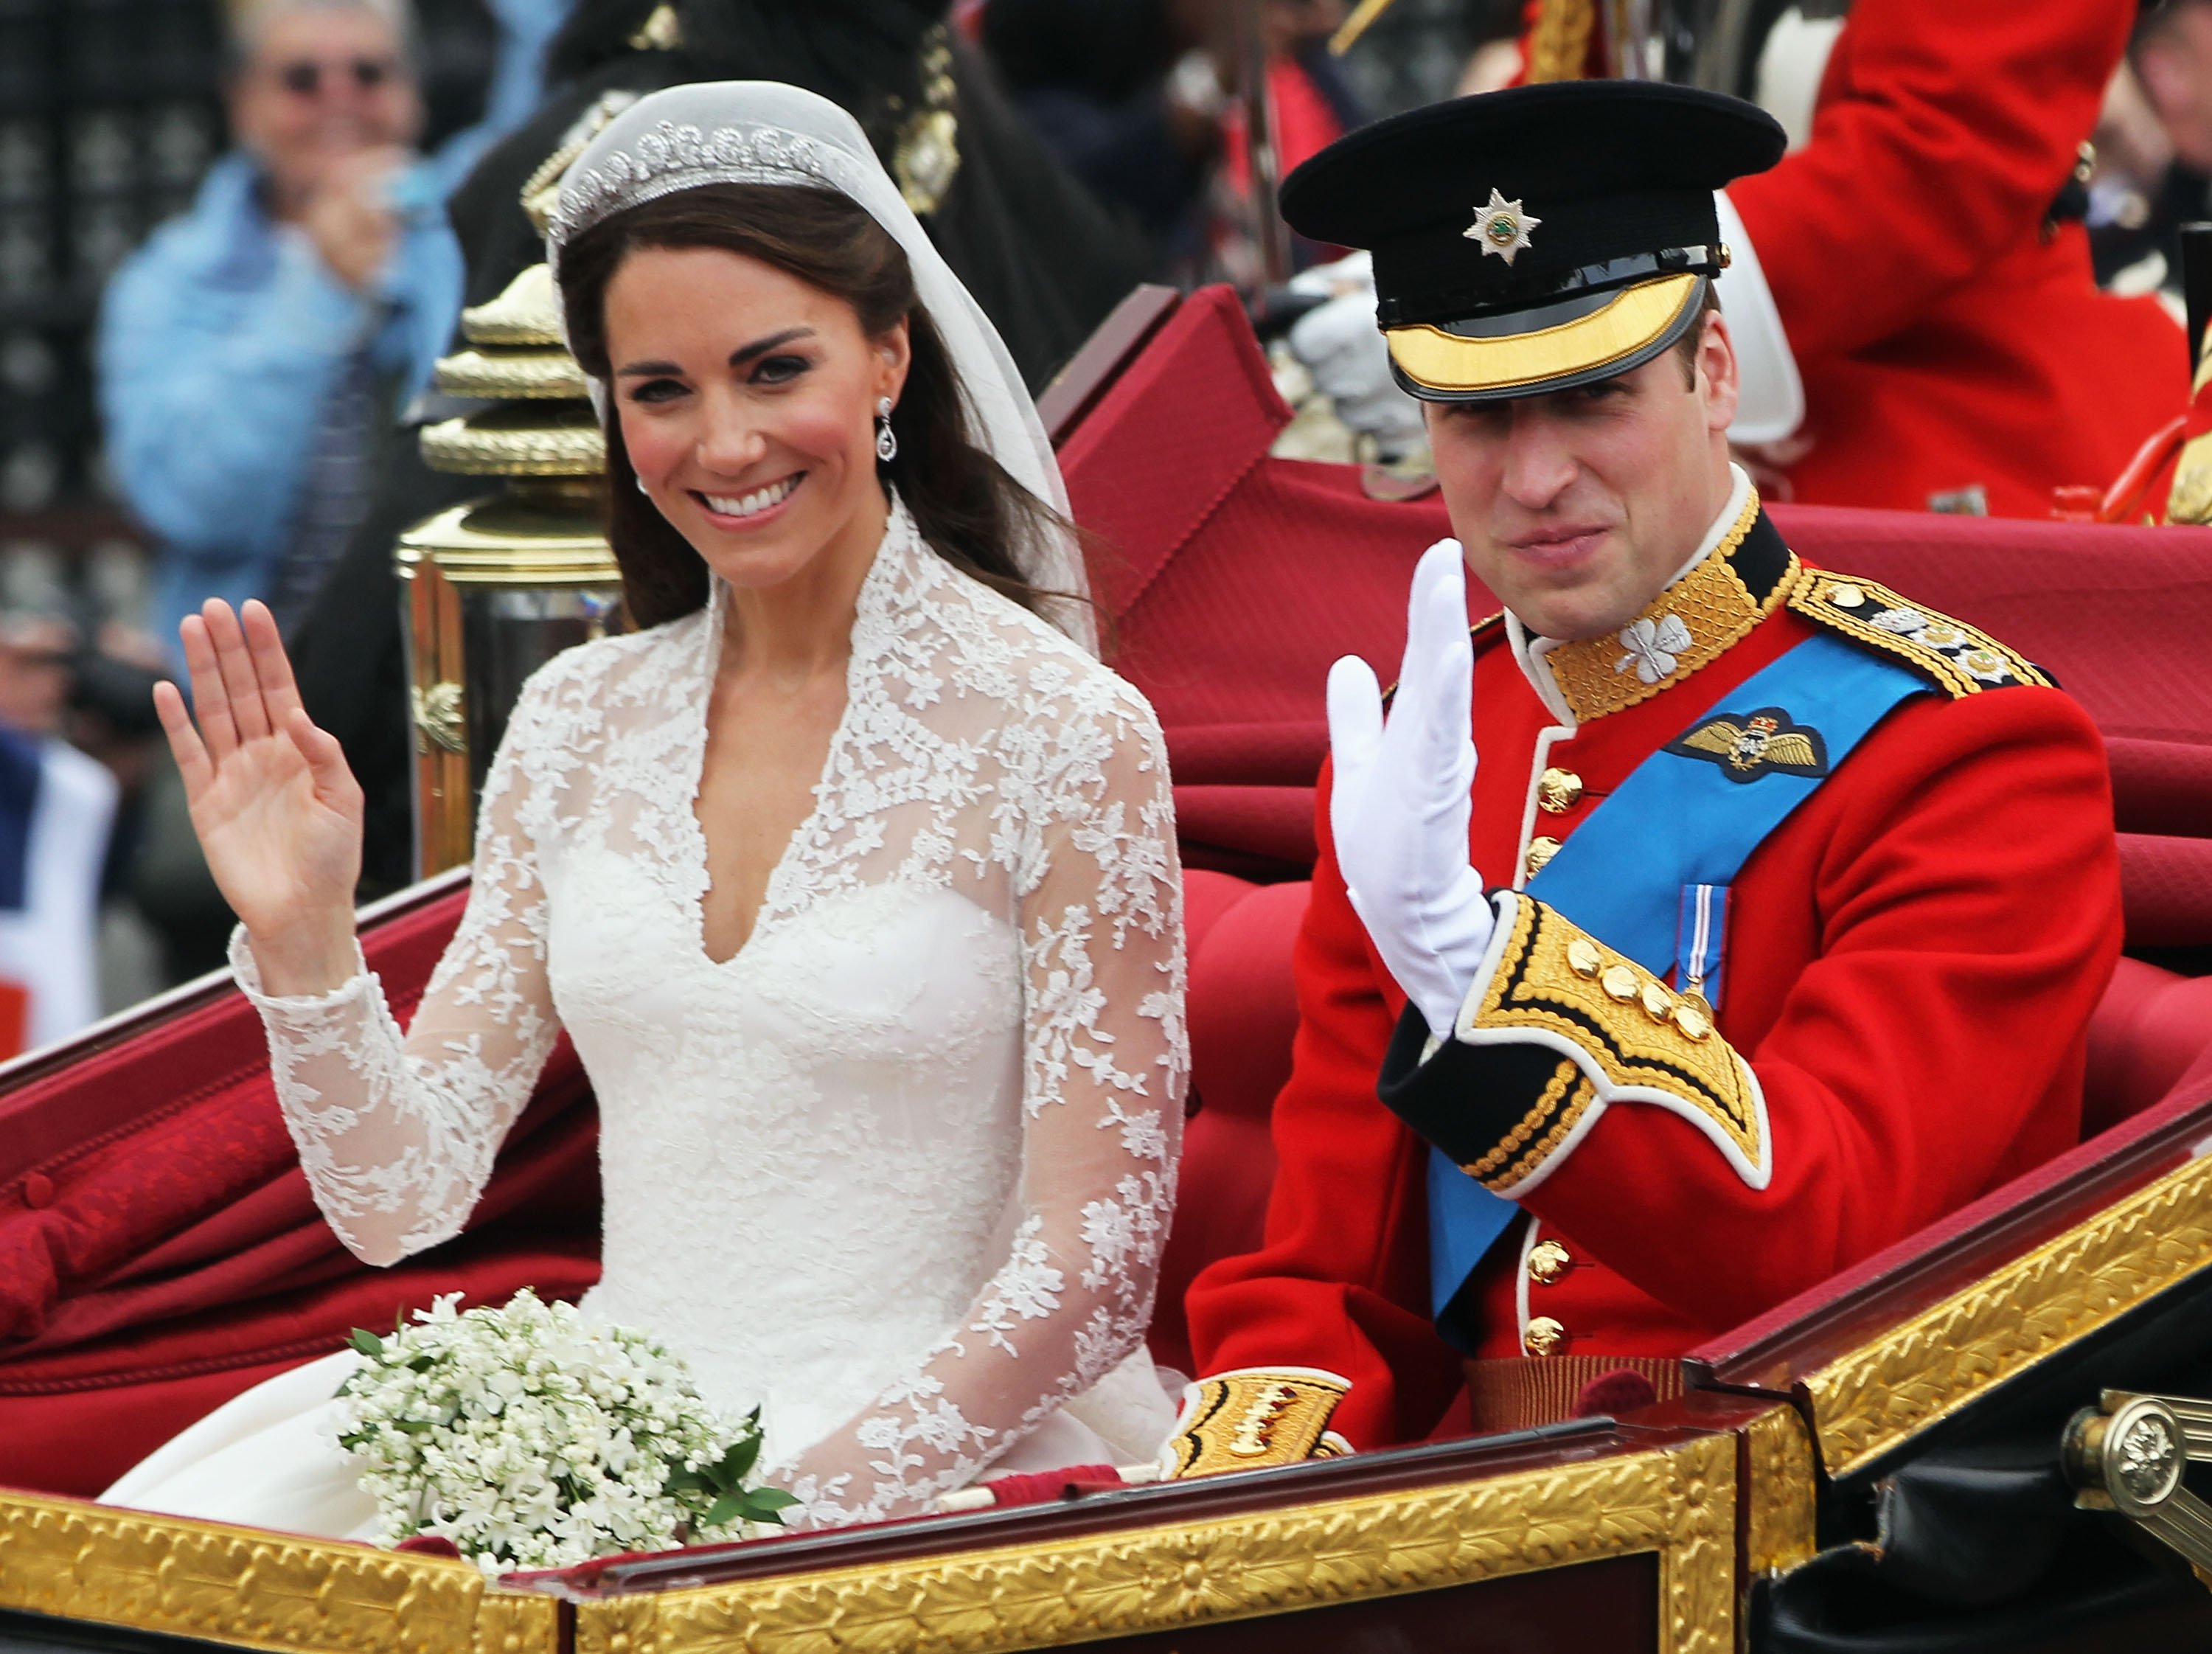 Kate Middleton and Prince William on their wedding day in London in 2011. |  Source: Getty Images